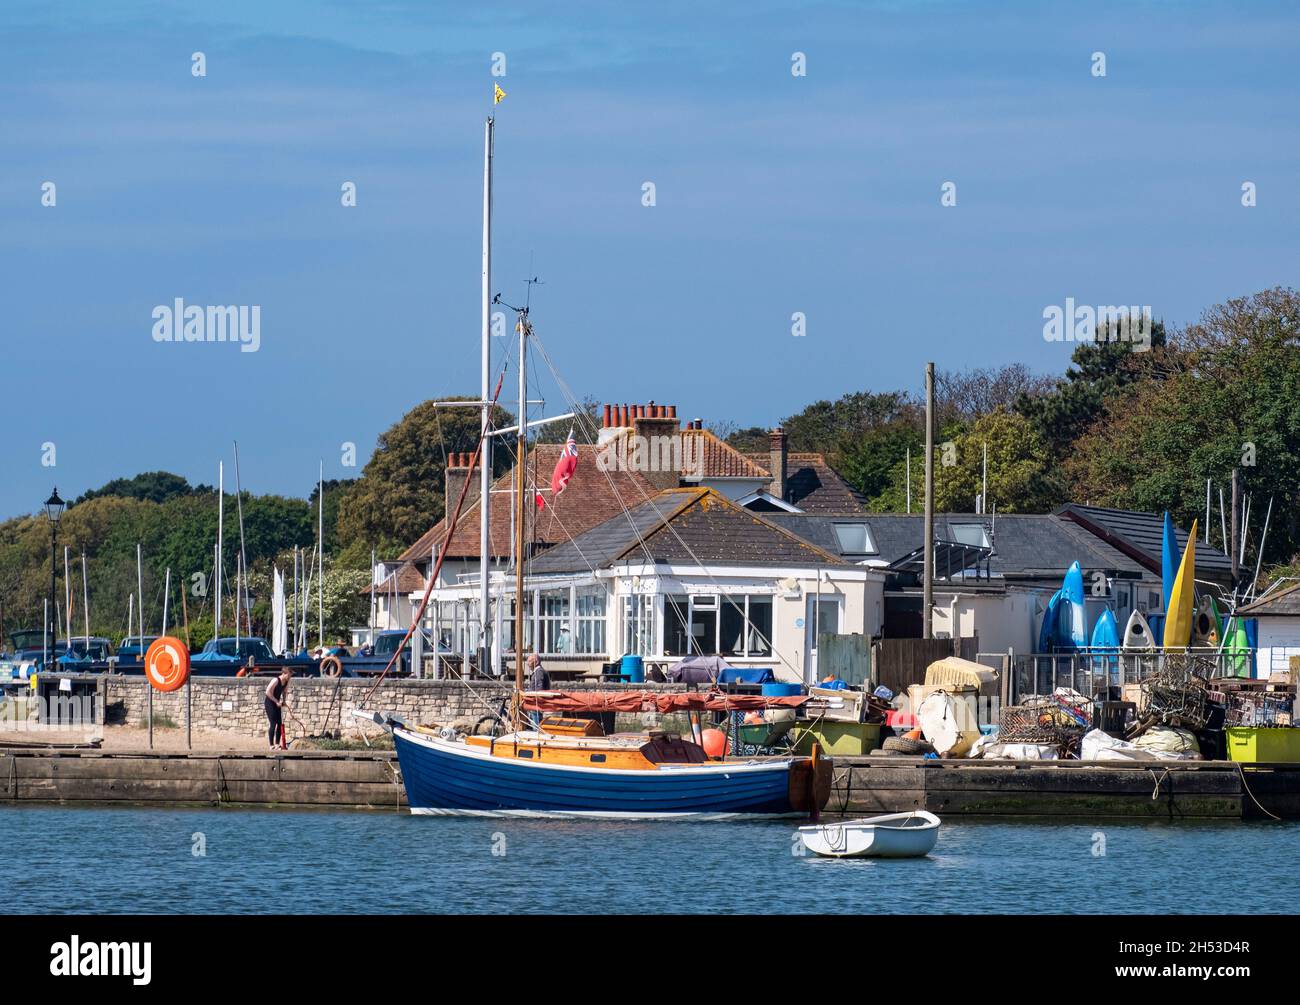 Keyhaven Harbour and Yacht Club, Milford on Sea, Lymington, Hampshire Stock Photo